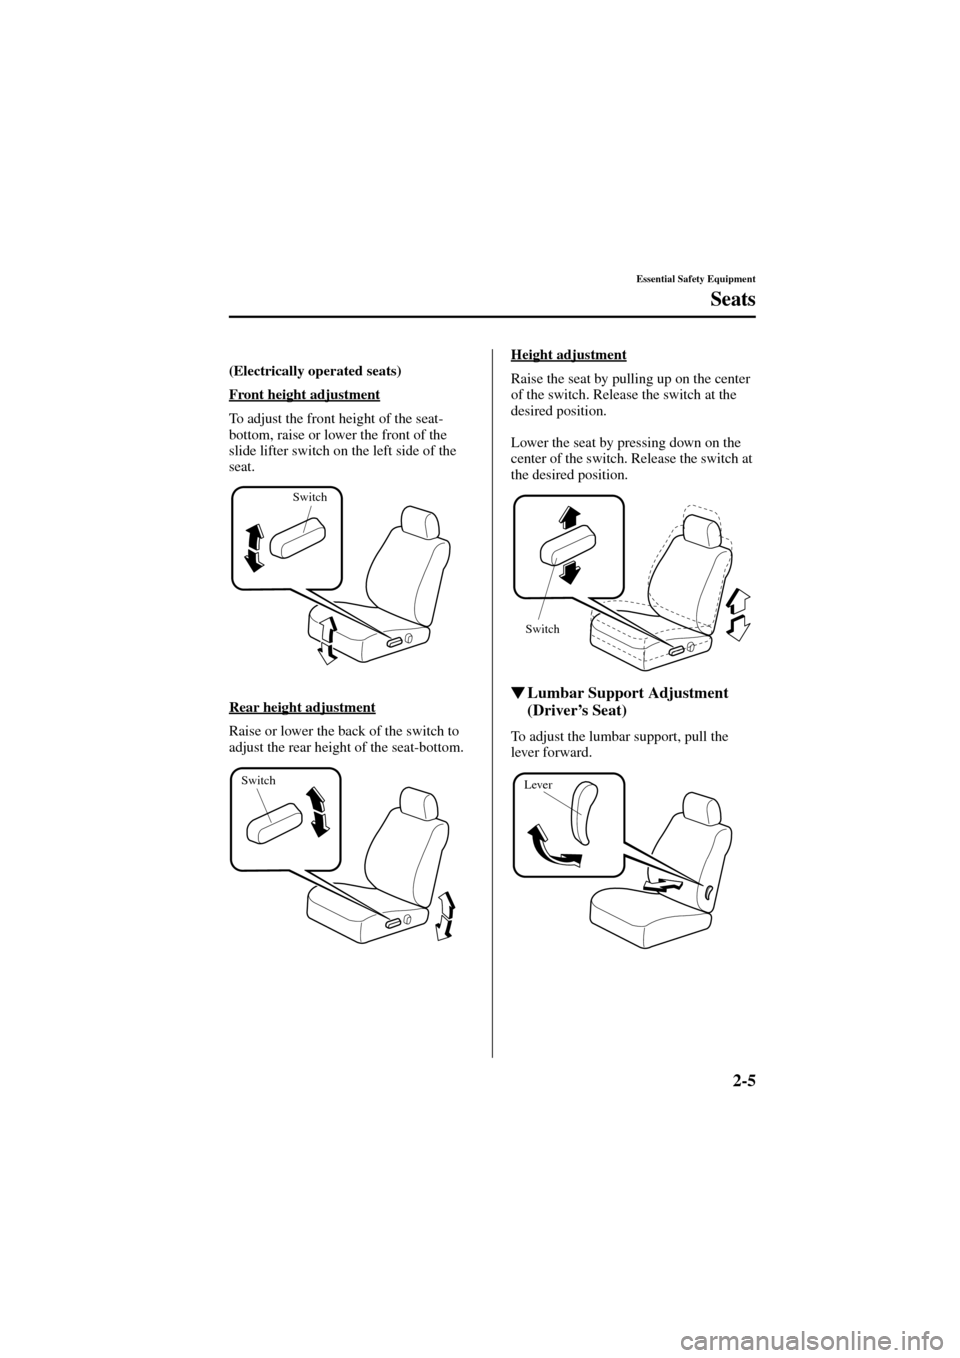 MAZDA MODEL 6 2004  Owners Manual (in English) 2-5
Essential Safety Equipment
Seats
Form No. 8R29-EA-02I
(Electrically operated seats)
 
Front height adjustment
To adjust the front height of the seat-
bottom, raise or lower the front of the 
slide